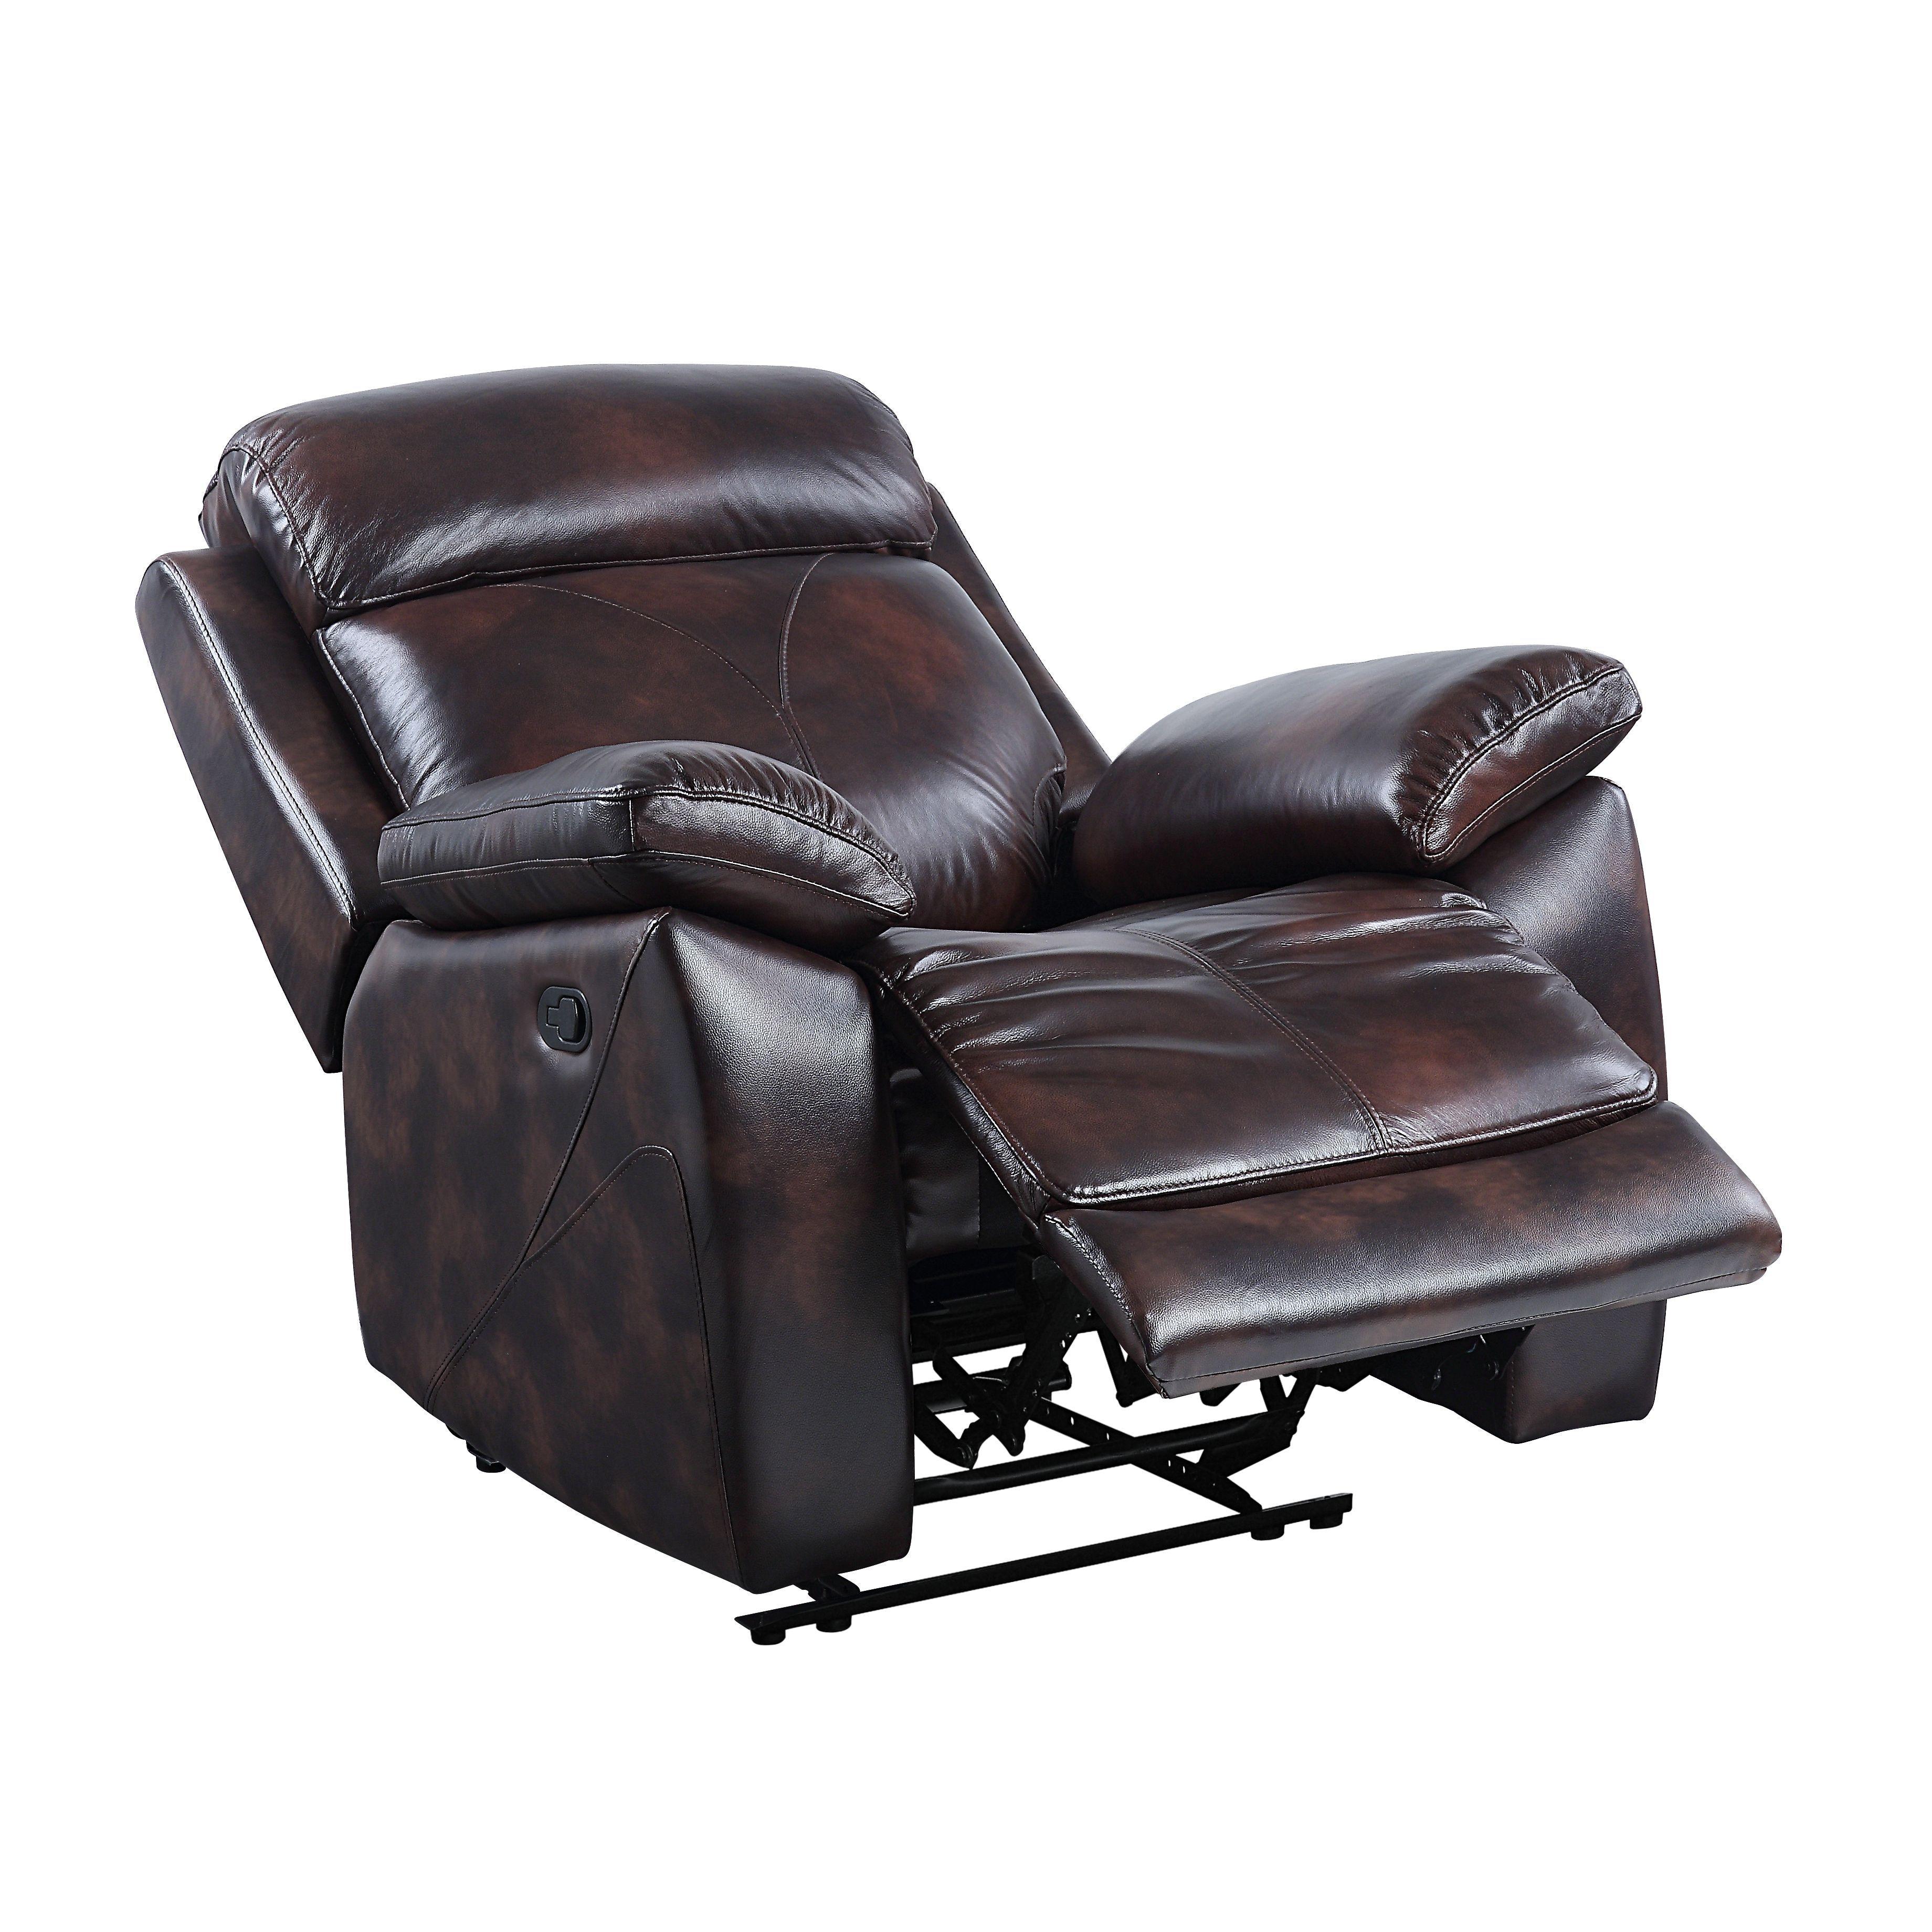 

    
Contemporary Dark Brown Leather Recliner by Acme Perfiel LV00068
